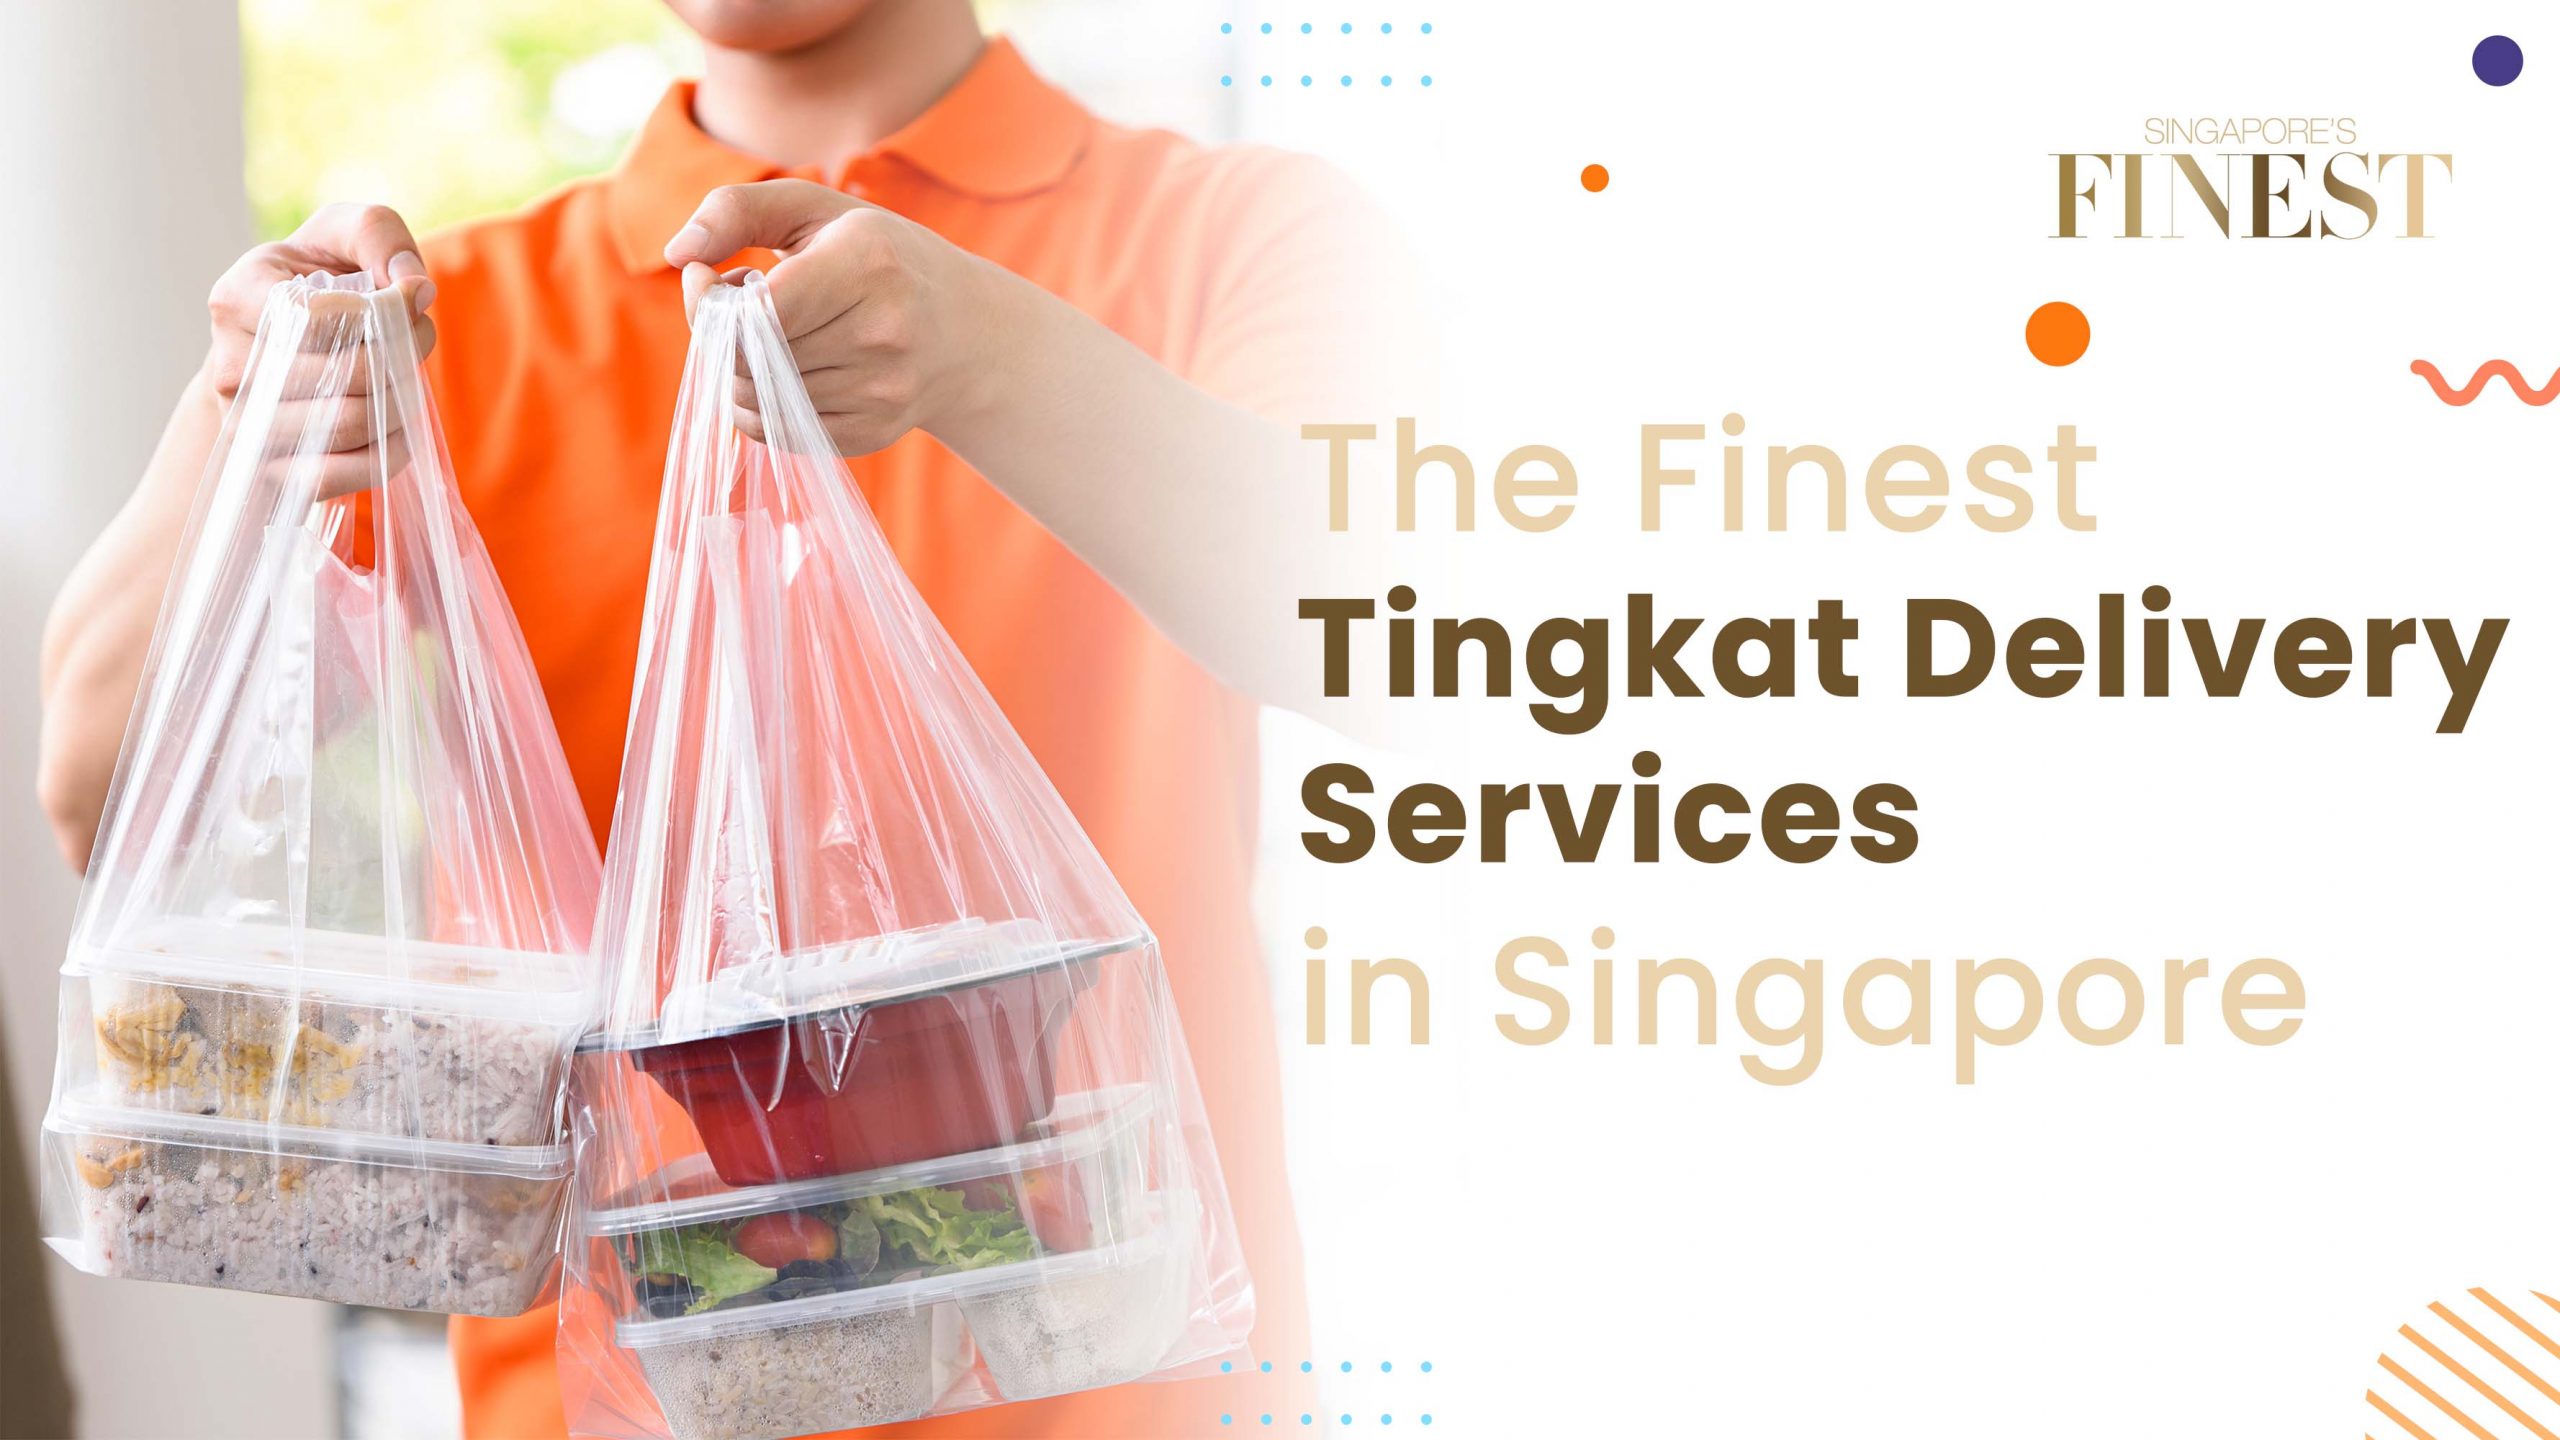 Finest Tingkat Delivery Services in Singapore